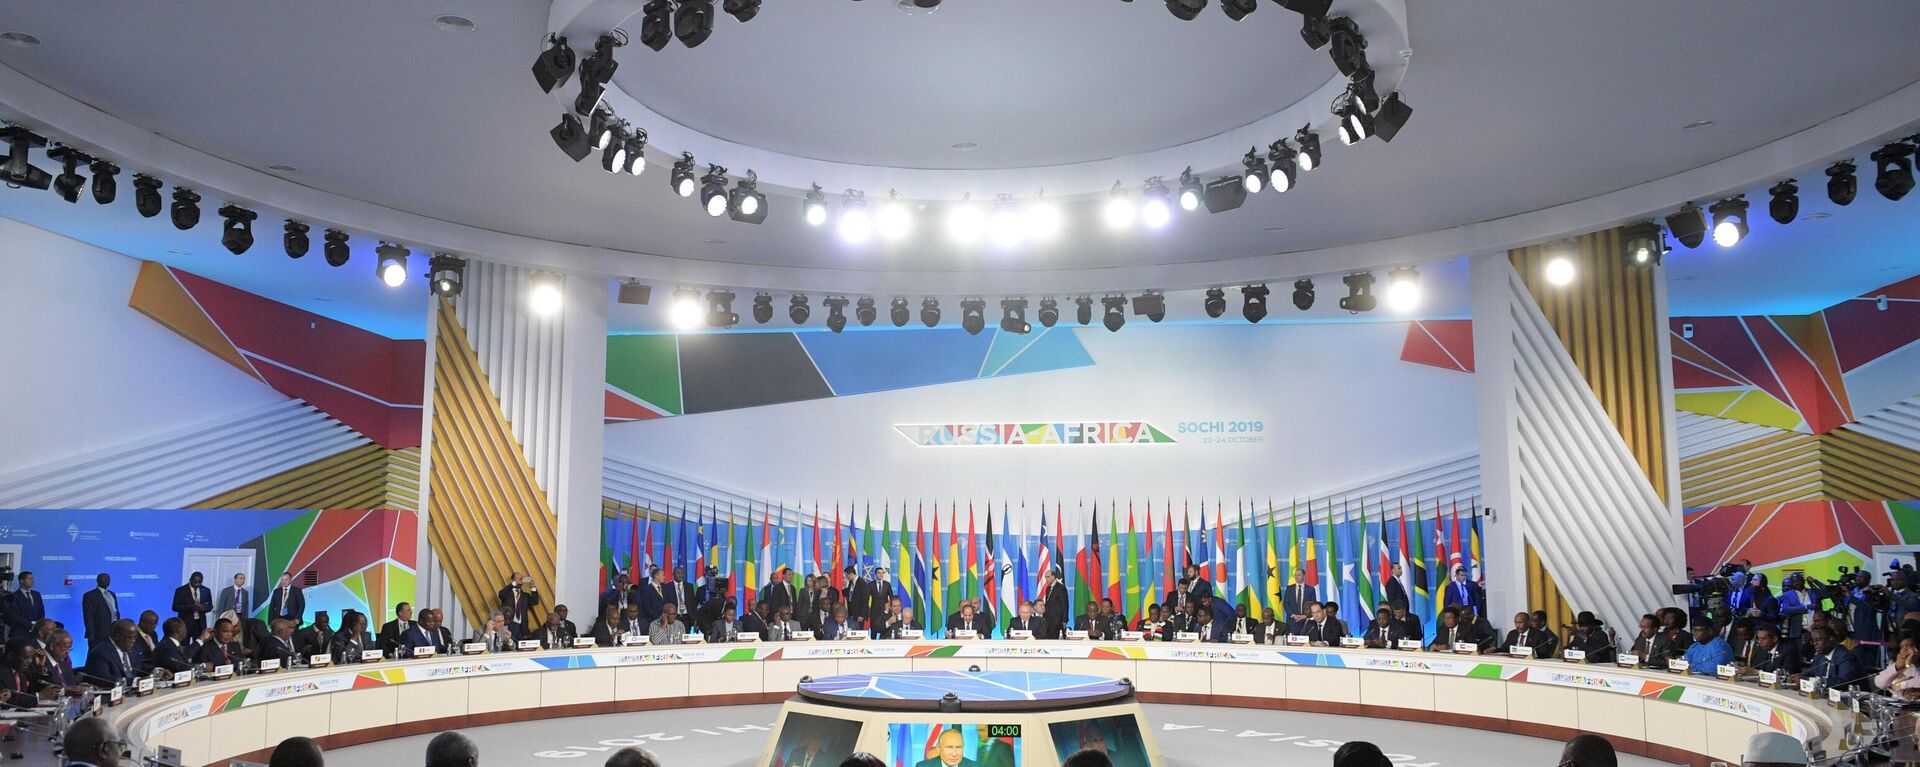 President Putin speaks at the plenary session of the Russia-Africa Summit in Sochi, Russia on October 24, 2019. File photo. - Sputnik International, 1920, 25.07.2023